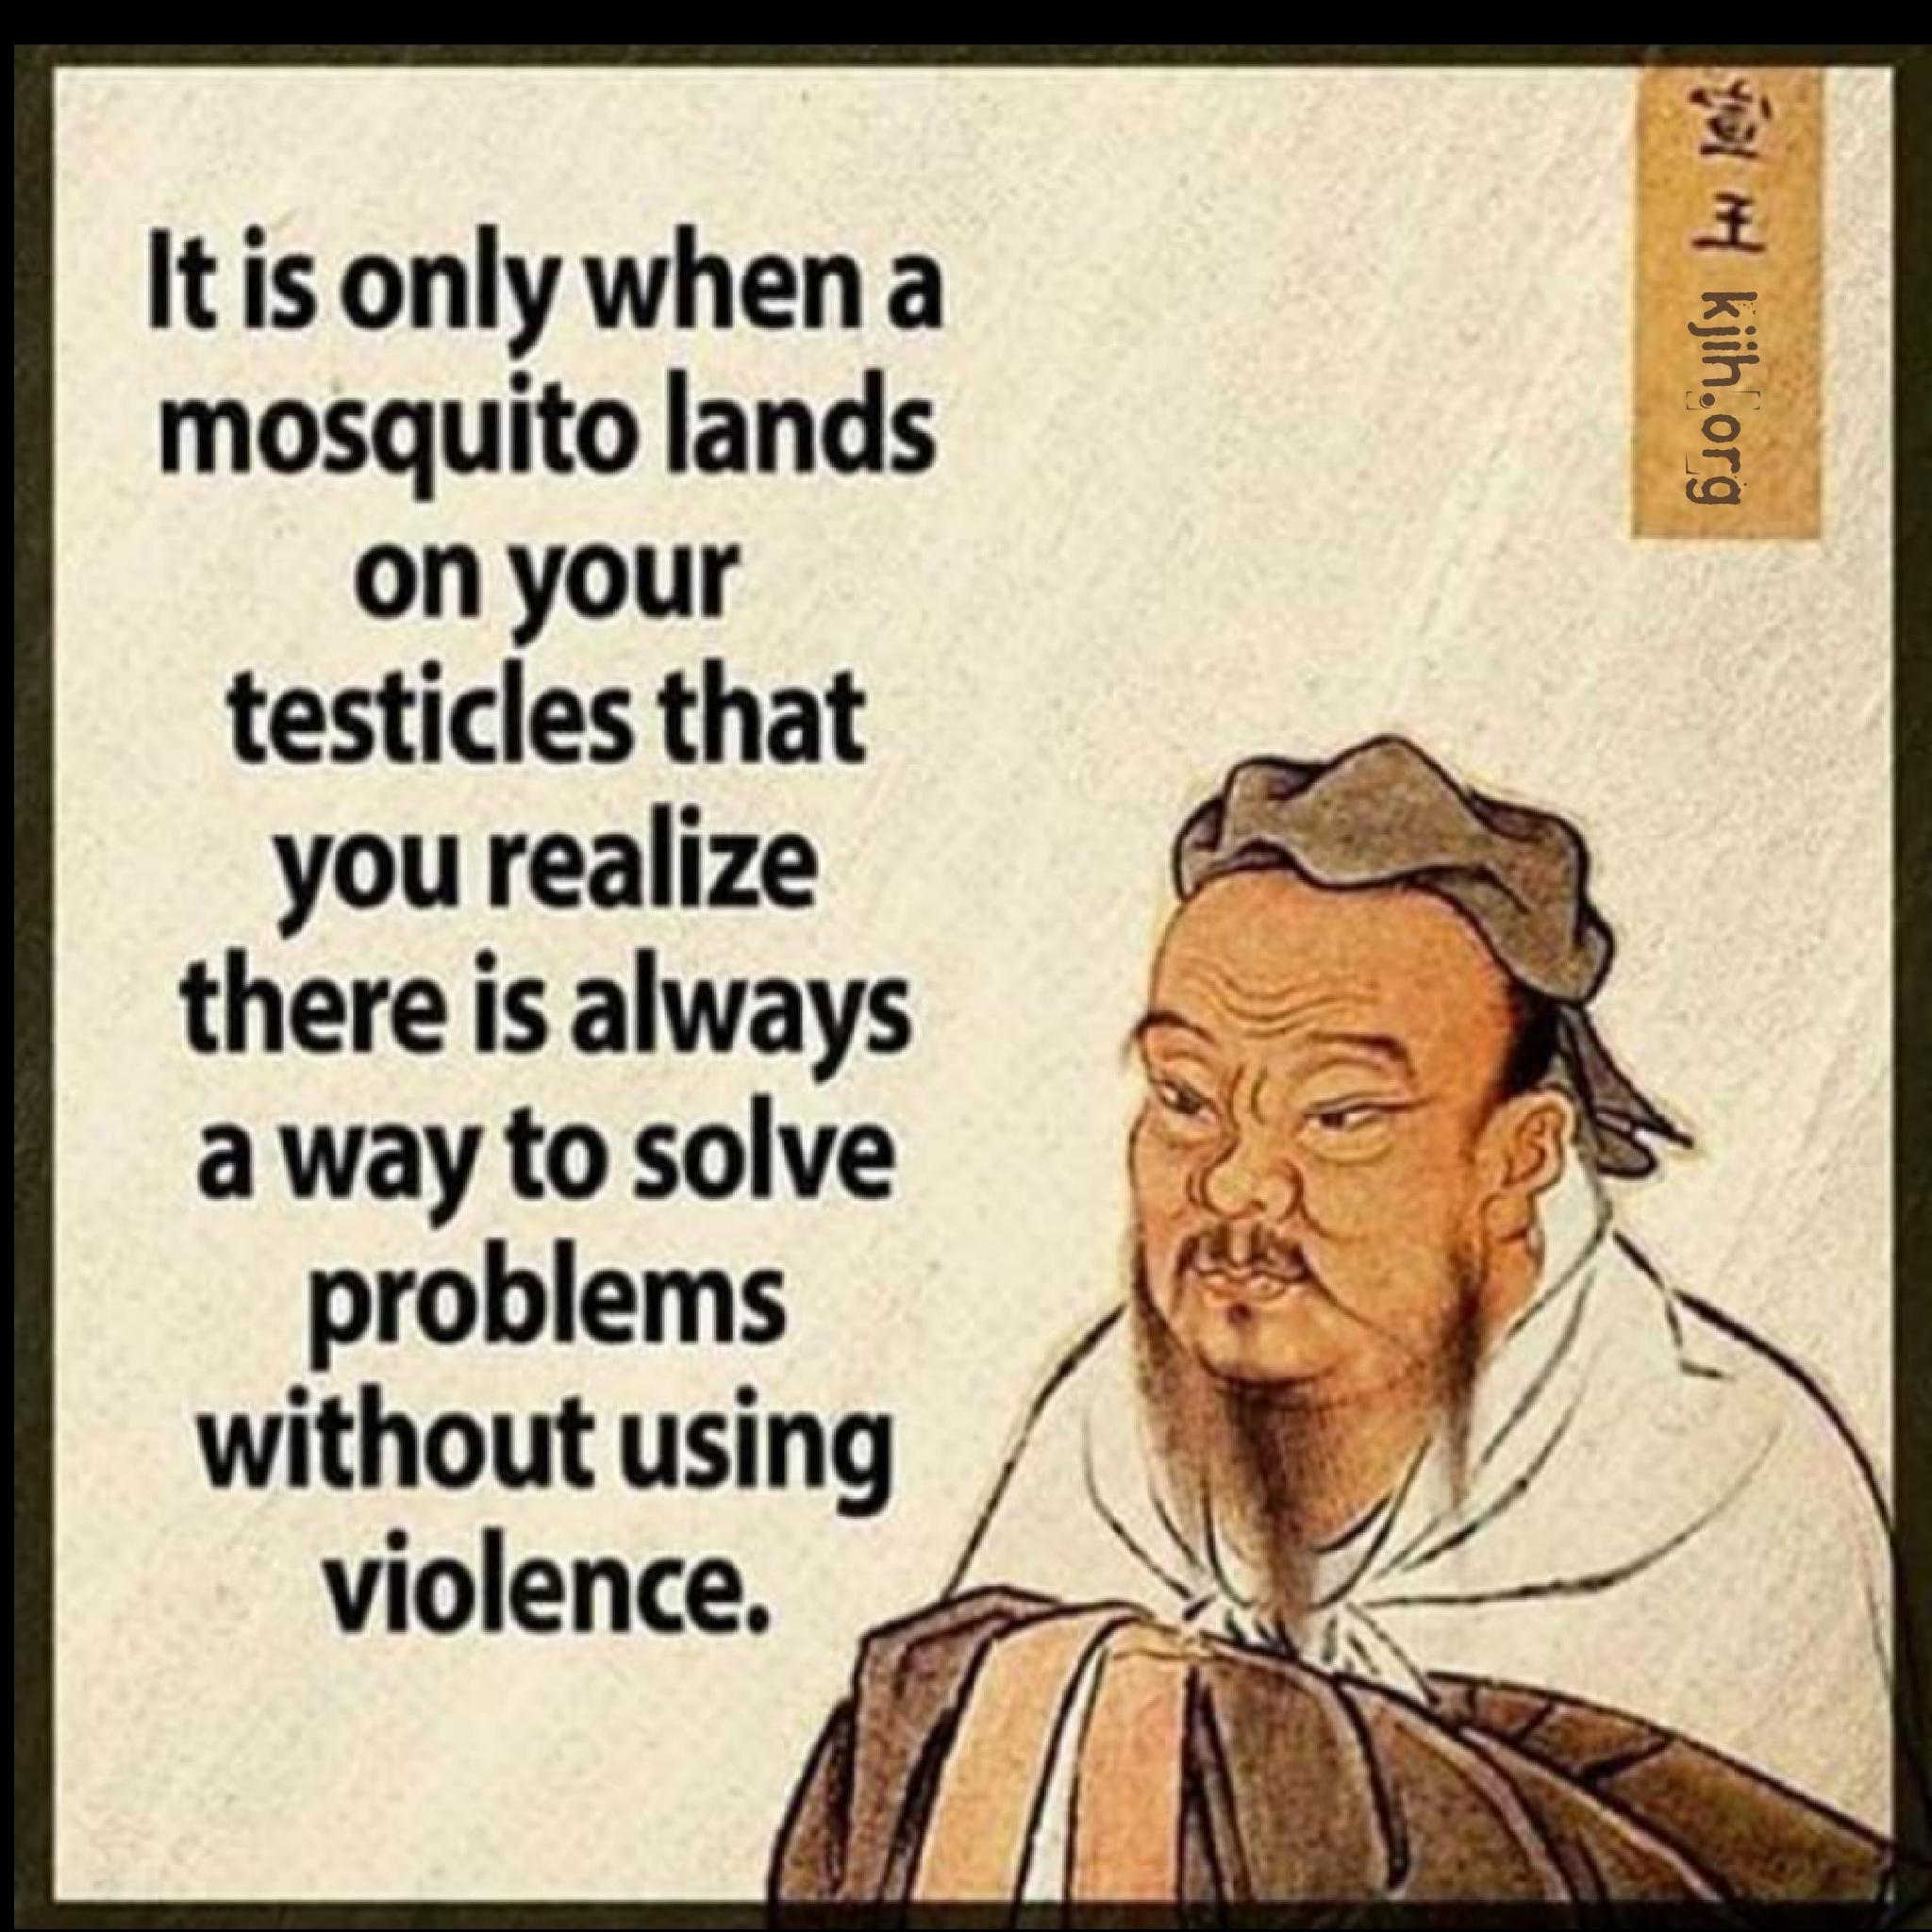 really funny pictures - confucius say - yol 4 kjih.org It is only when a mosquito lands on your testicles that you realize there is always a way to solve problems without using violence.